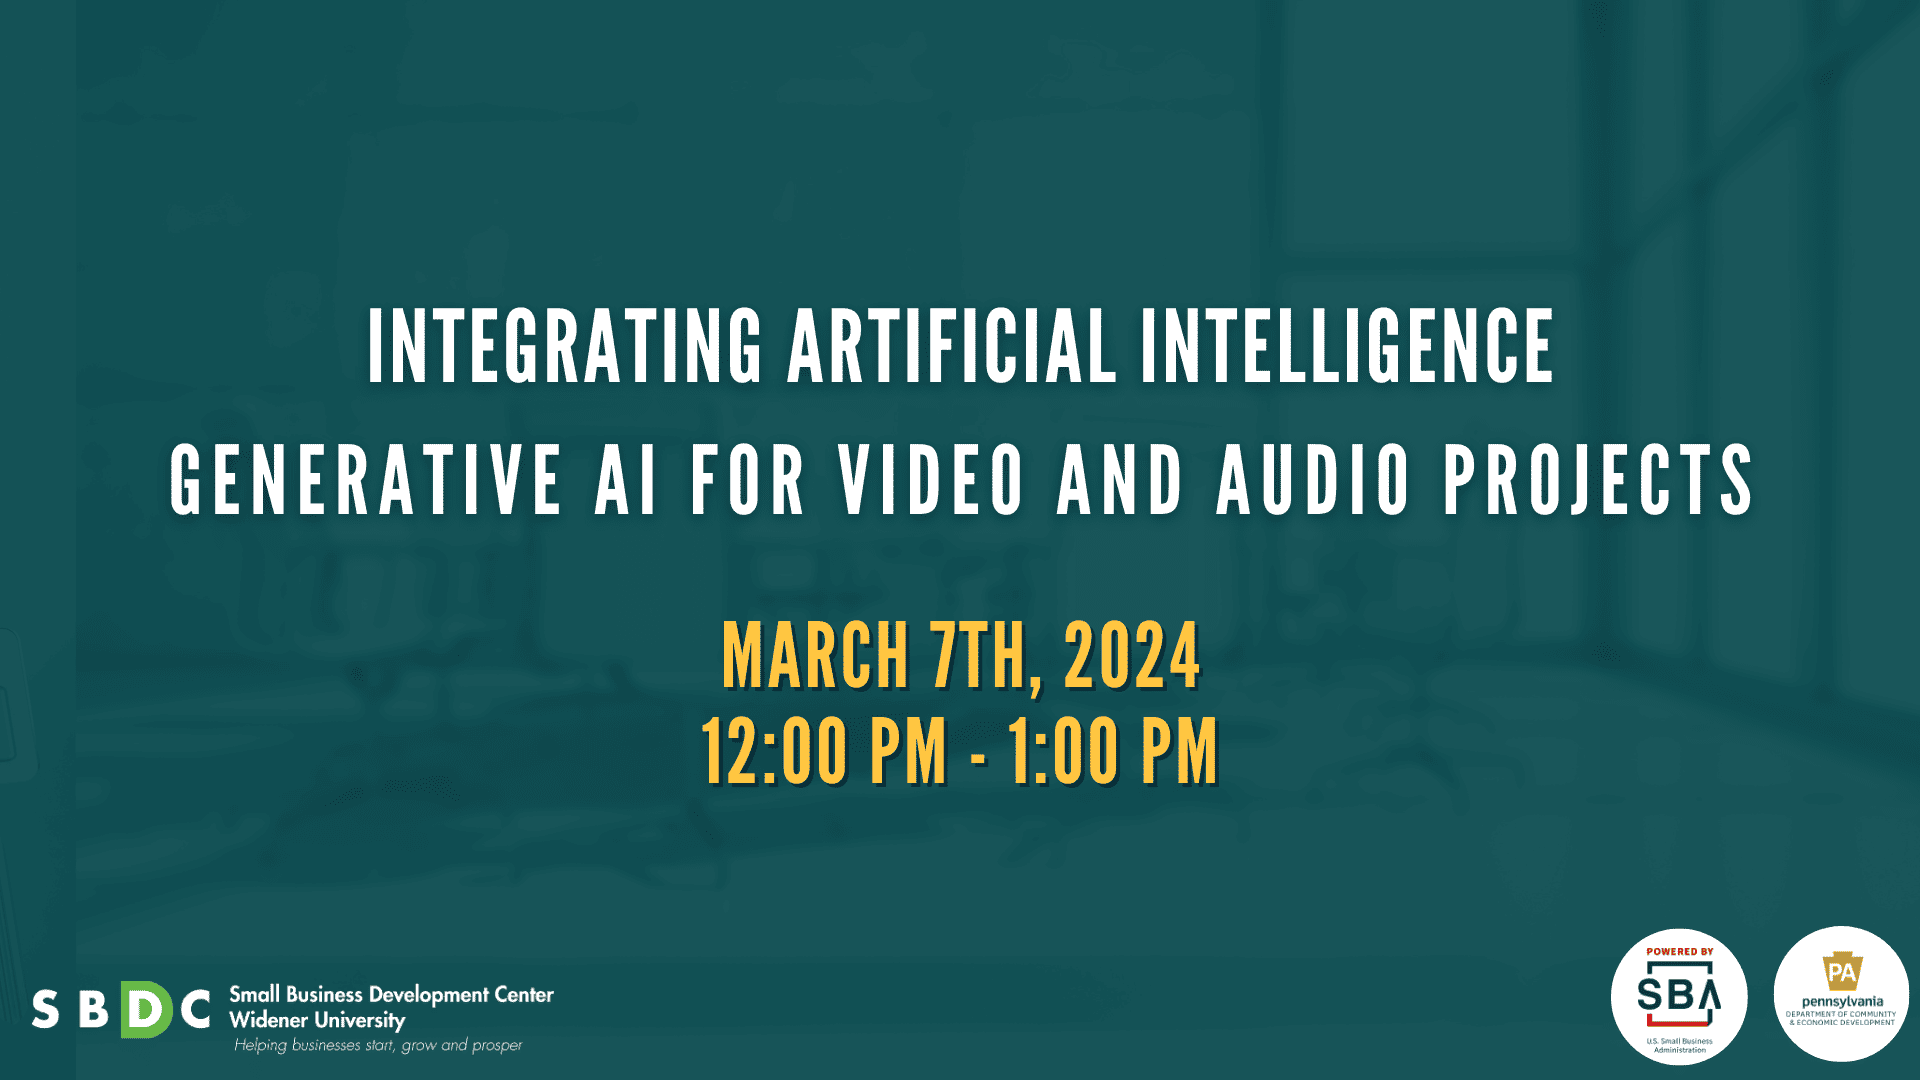 Integrating Artificial Intelligence: Creating Video & Audio Projects